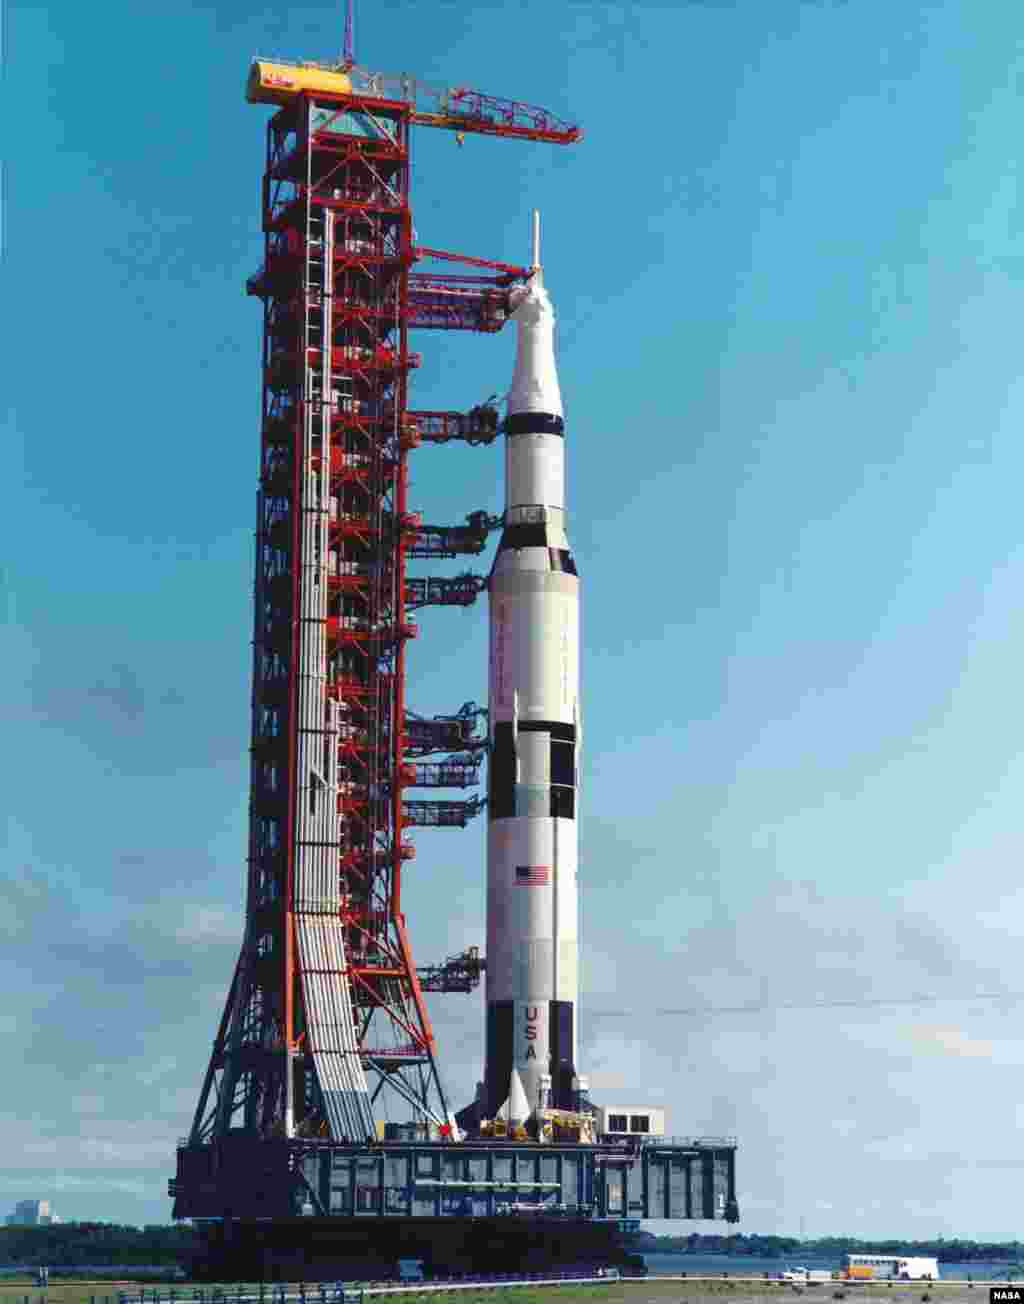 The Apollo 11 Saturn V rocket is being moved to the pad aboard the Mobile Launch Platform (MLP) at Cape Canaveral May, 1969.